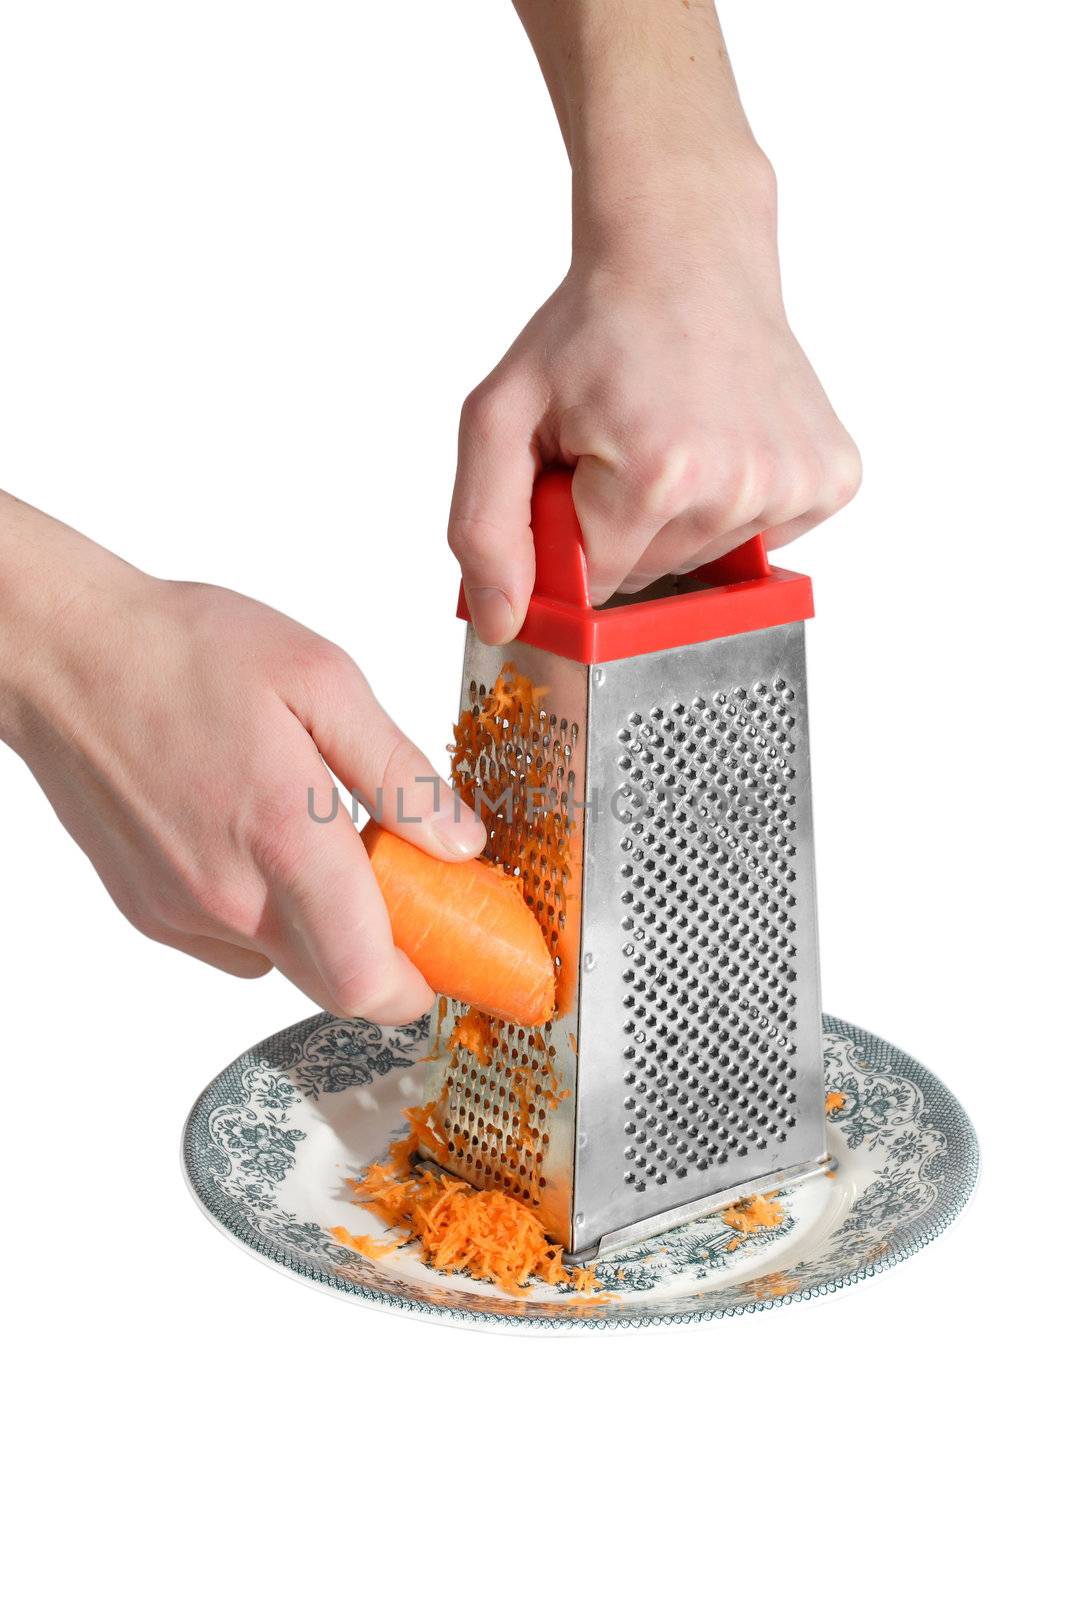 Preparation of carrots on a grater